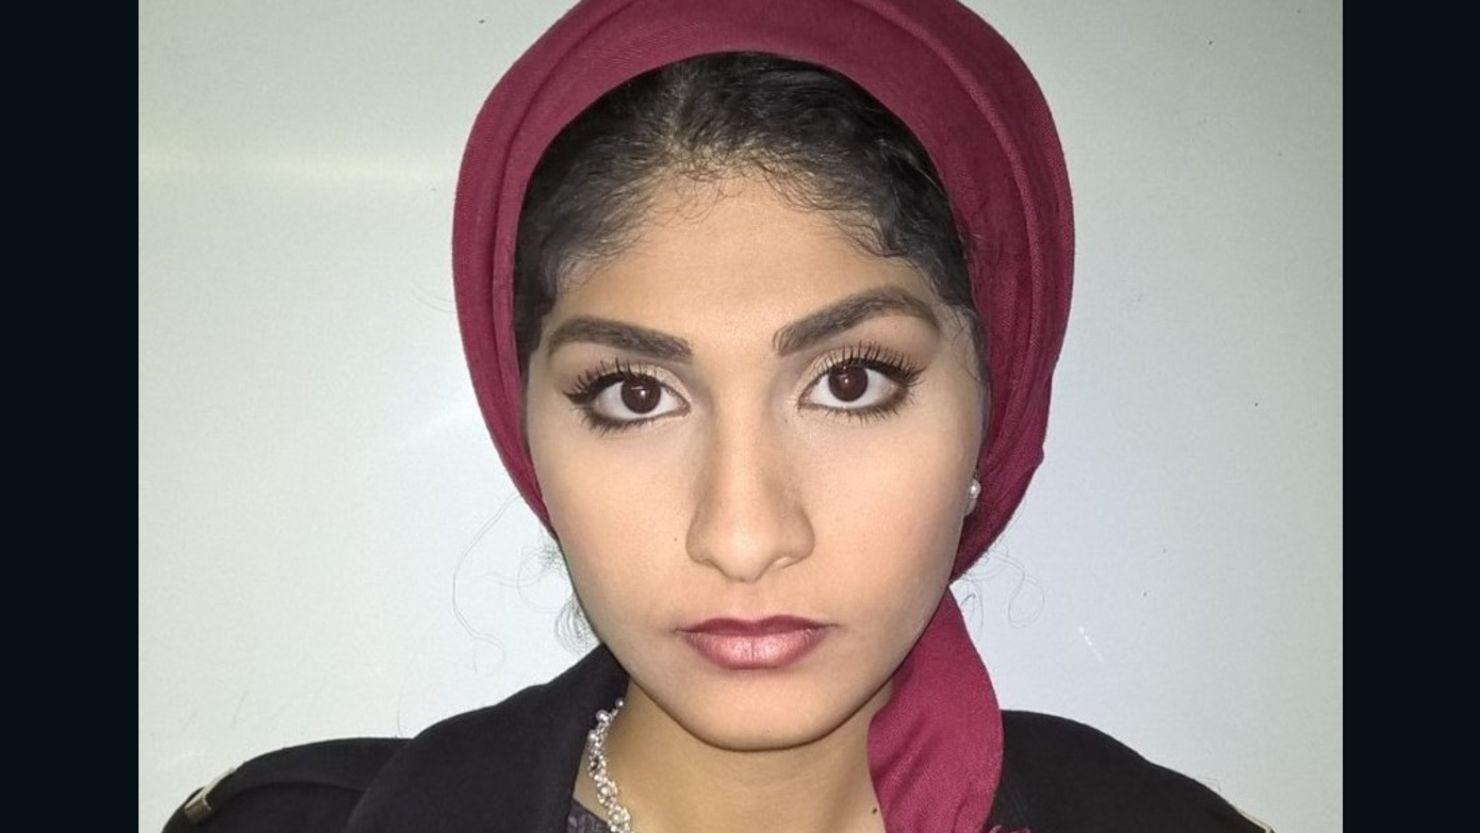 Yasmin Seweid, 18, faces charges for filing the false police report and obstructing governmental administration, police said. 